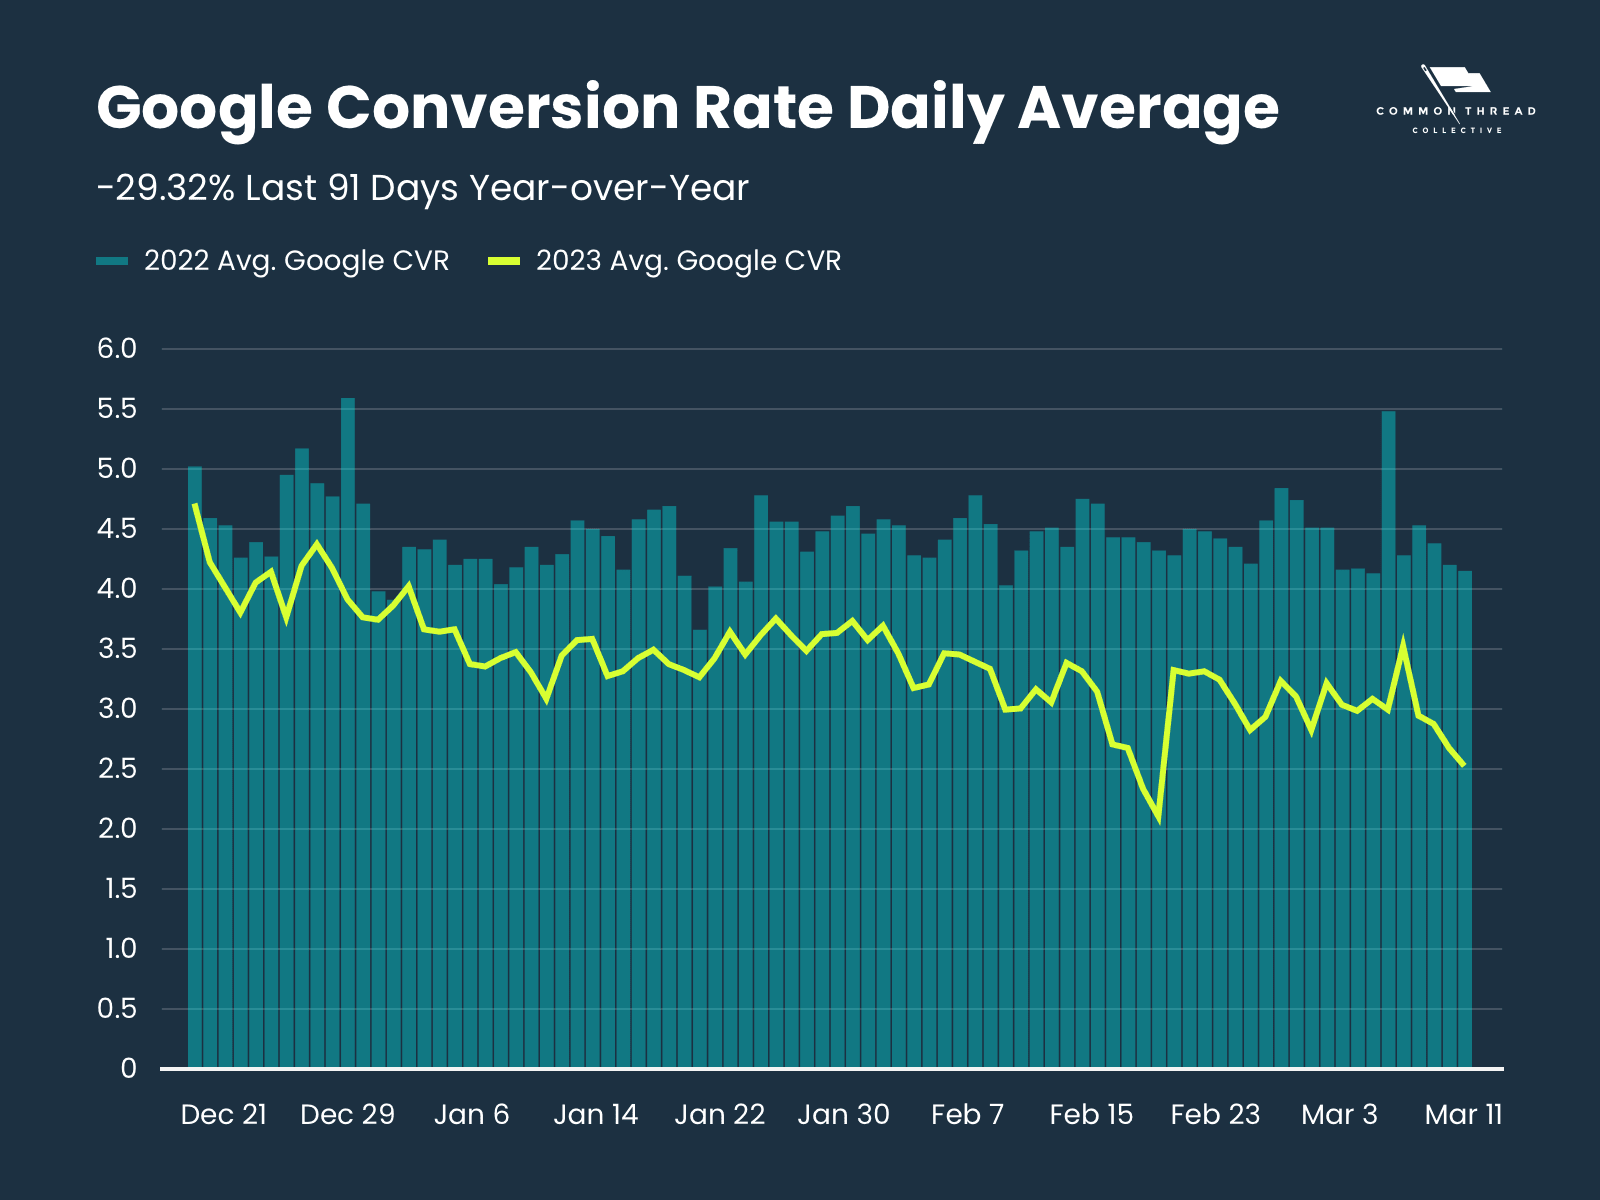 Google conversion rate daily average: -29.32% last 91-days year-over-year